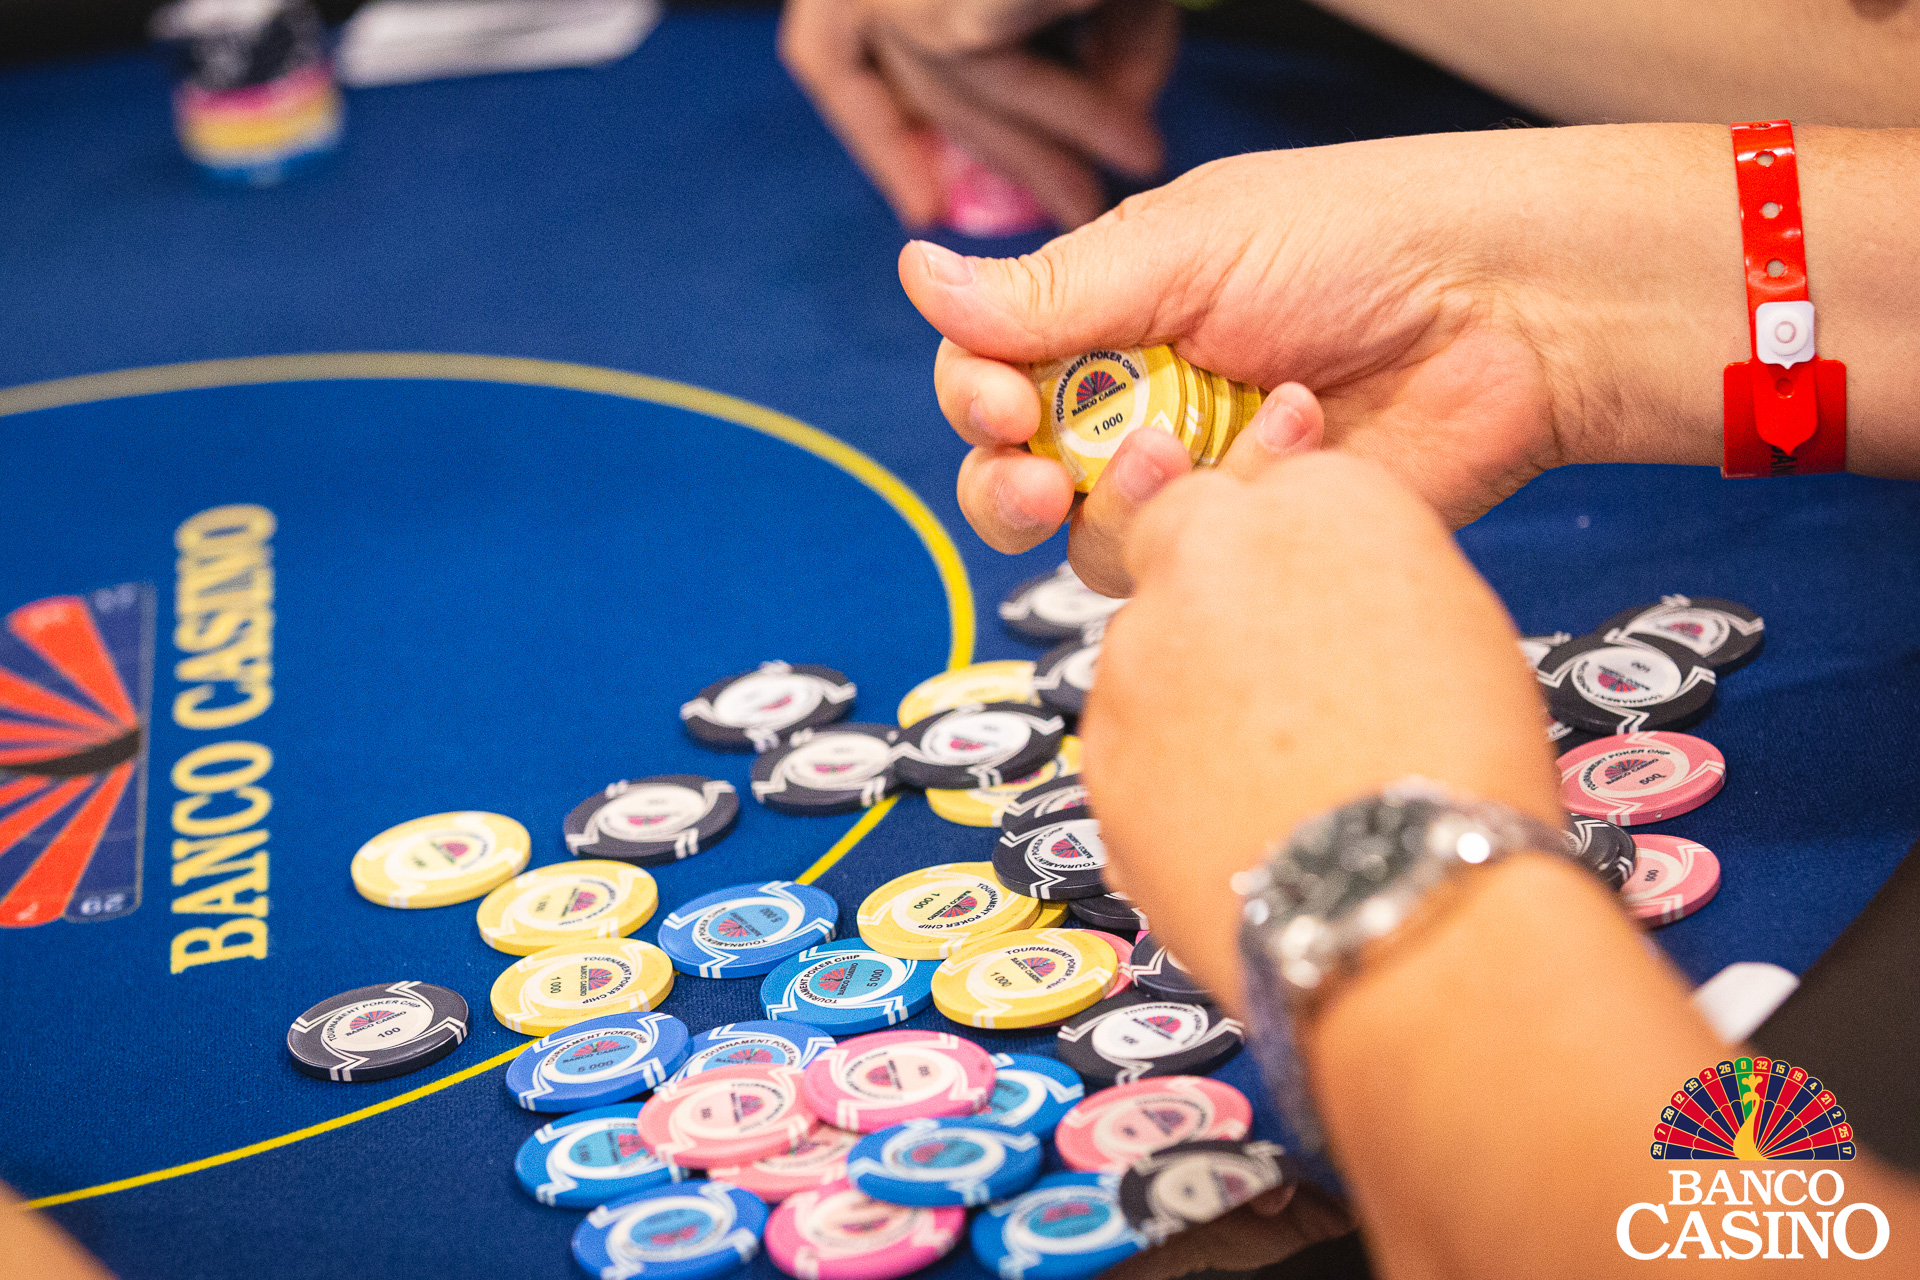 Poker Belgique Masters 250,000€ GTD - Friday will bring extreme action Main Event, Highroller and Super Friday!